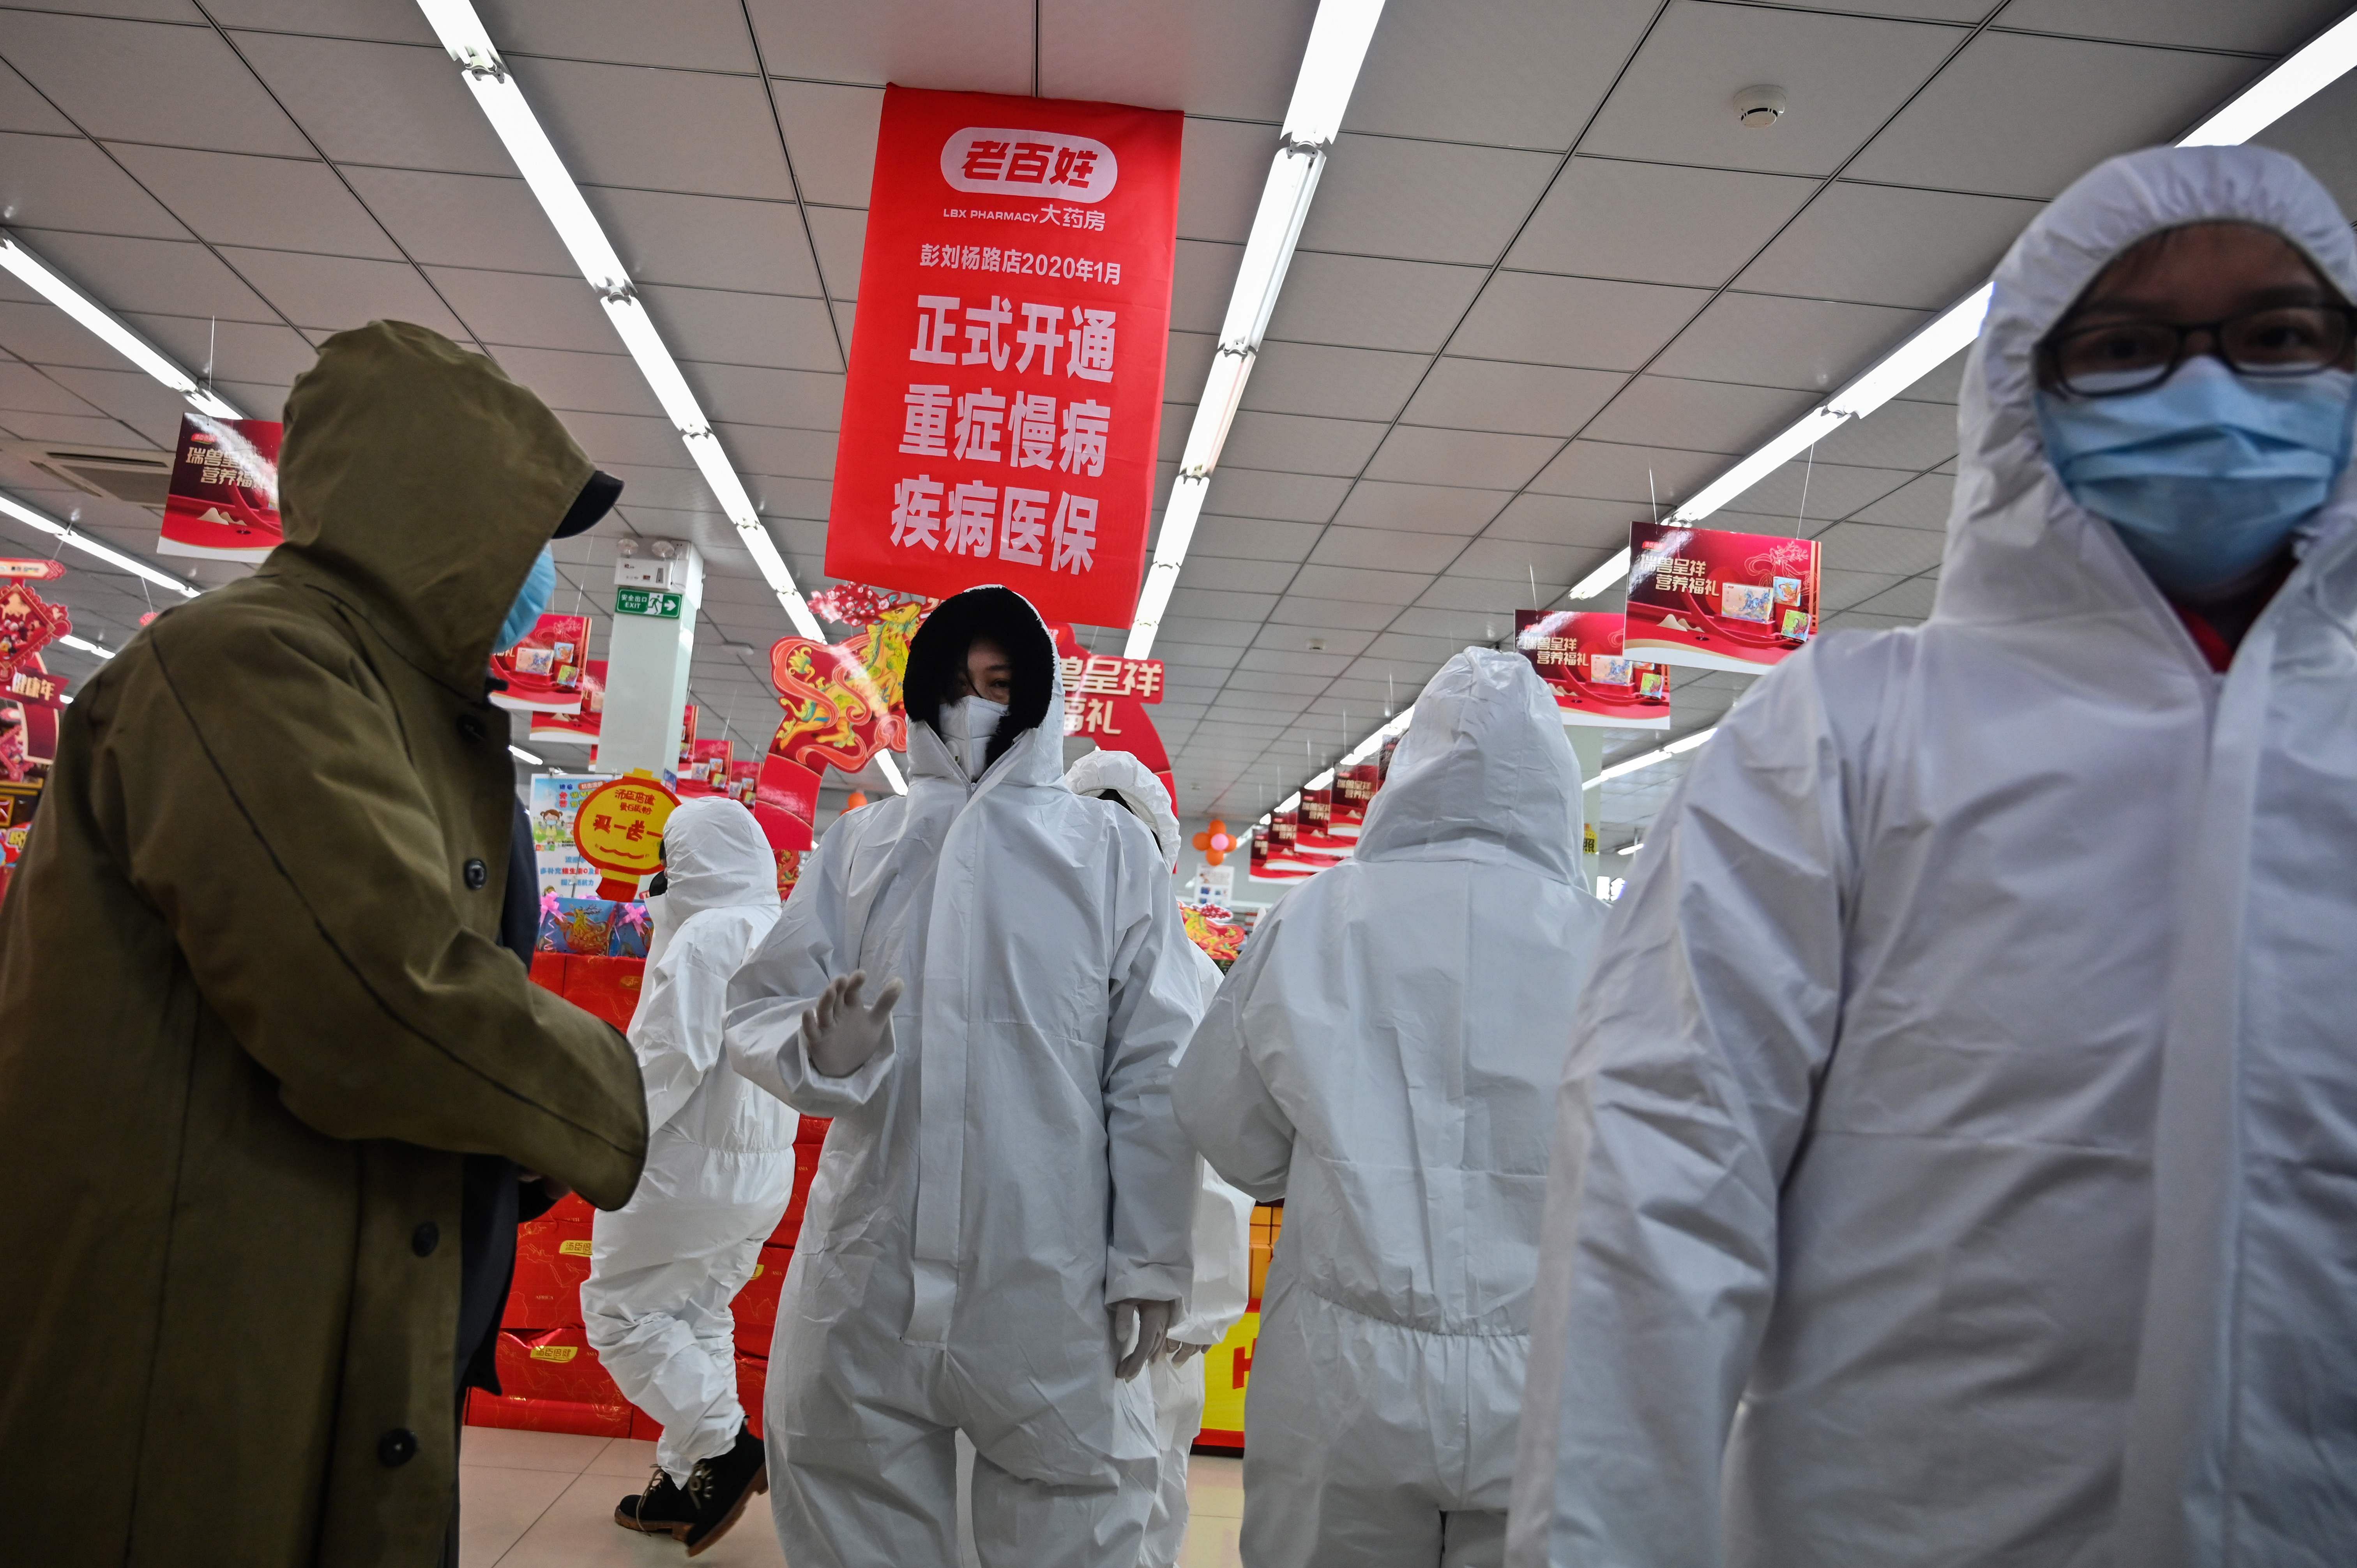 Pharmacy workers wearing protective clothes and masks serve customers in Wuhan. (AFP Photo)